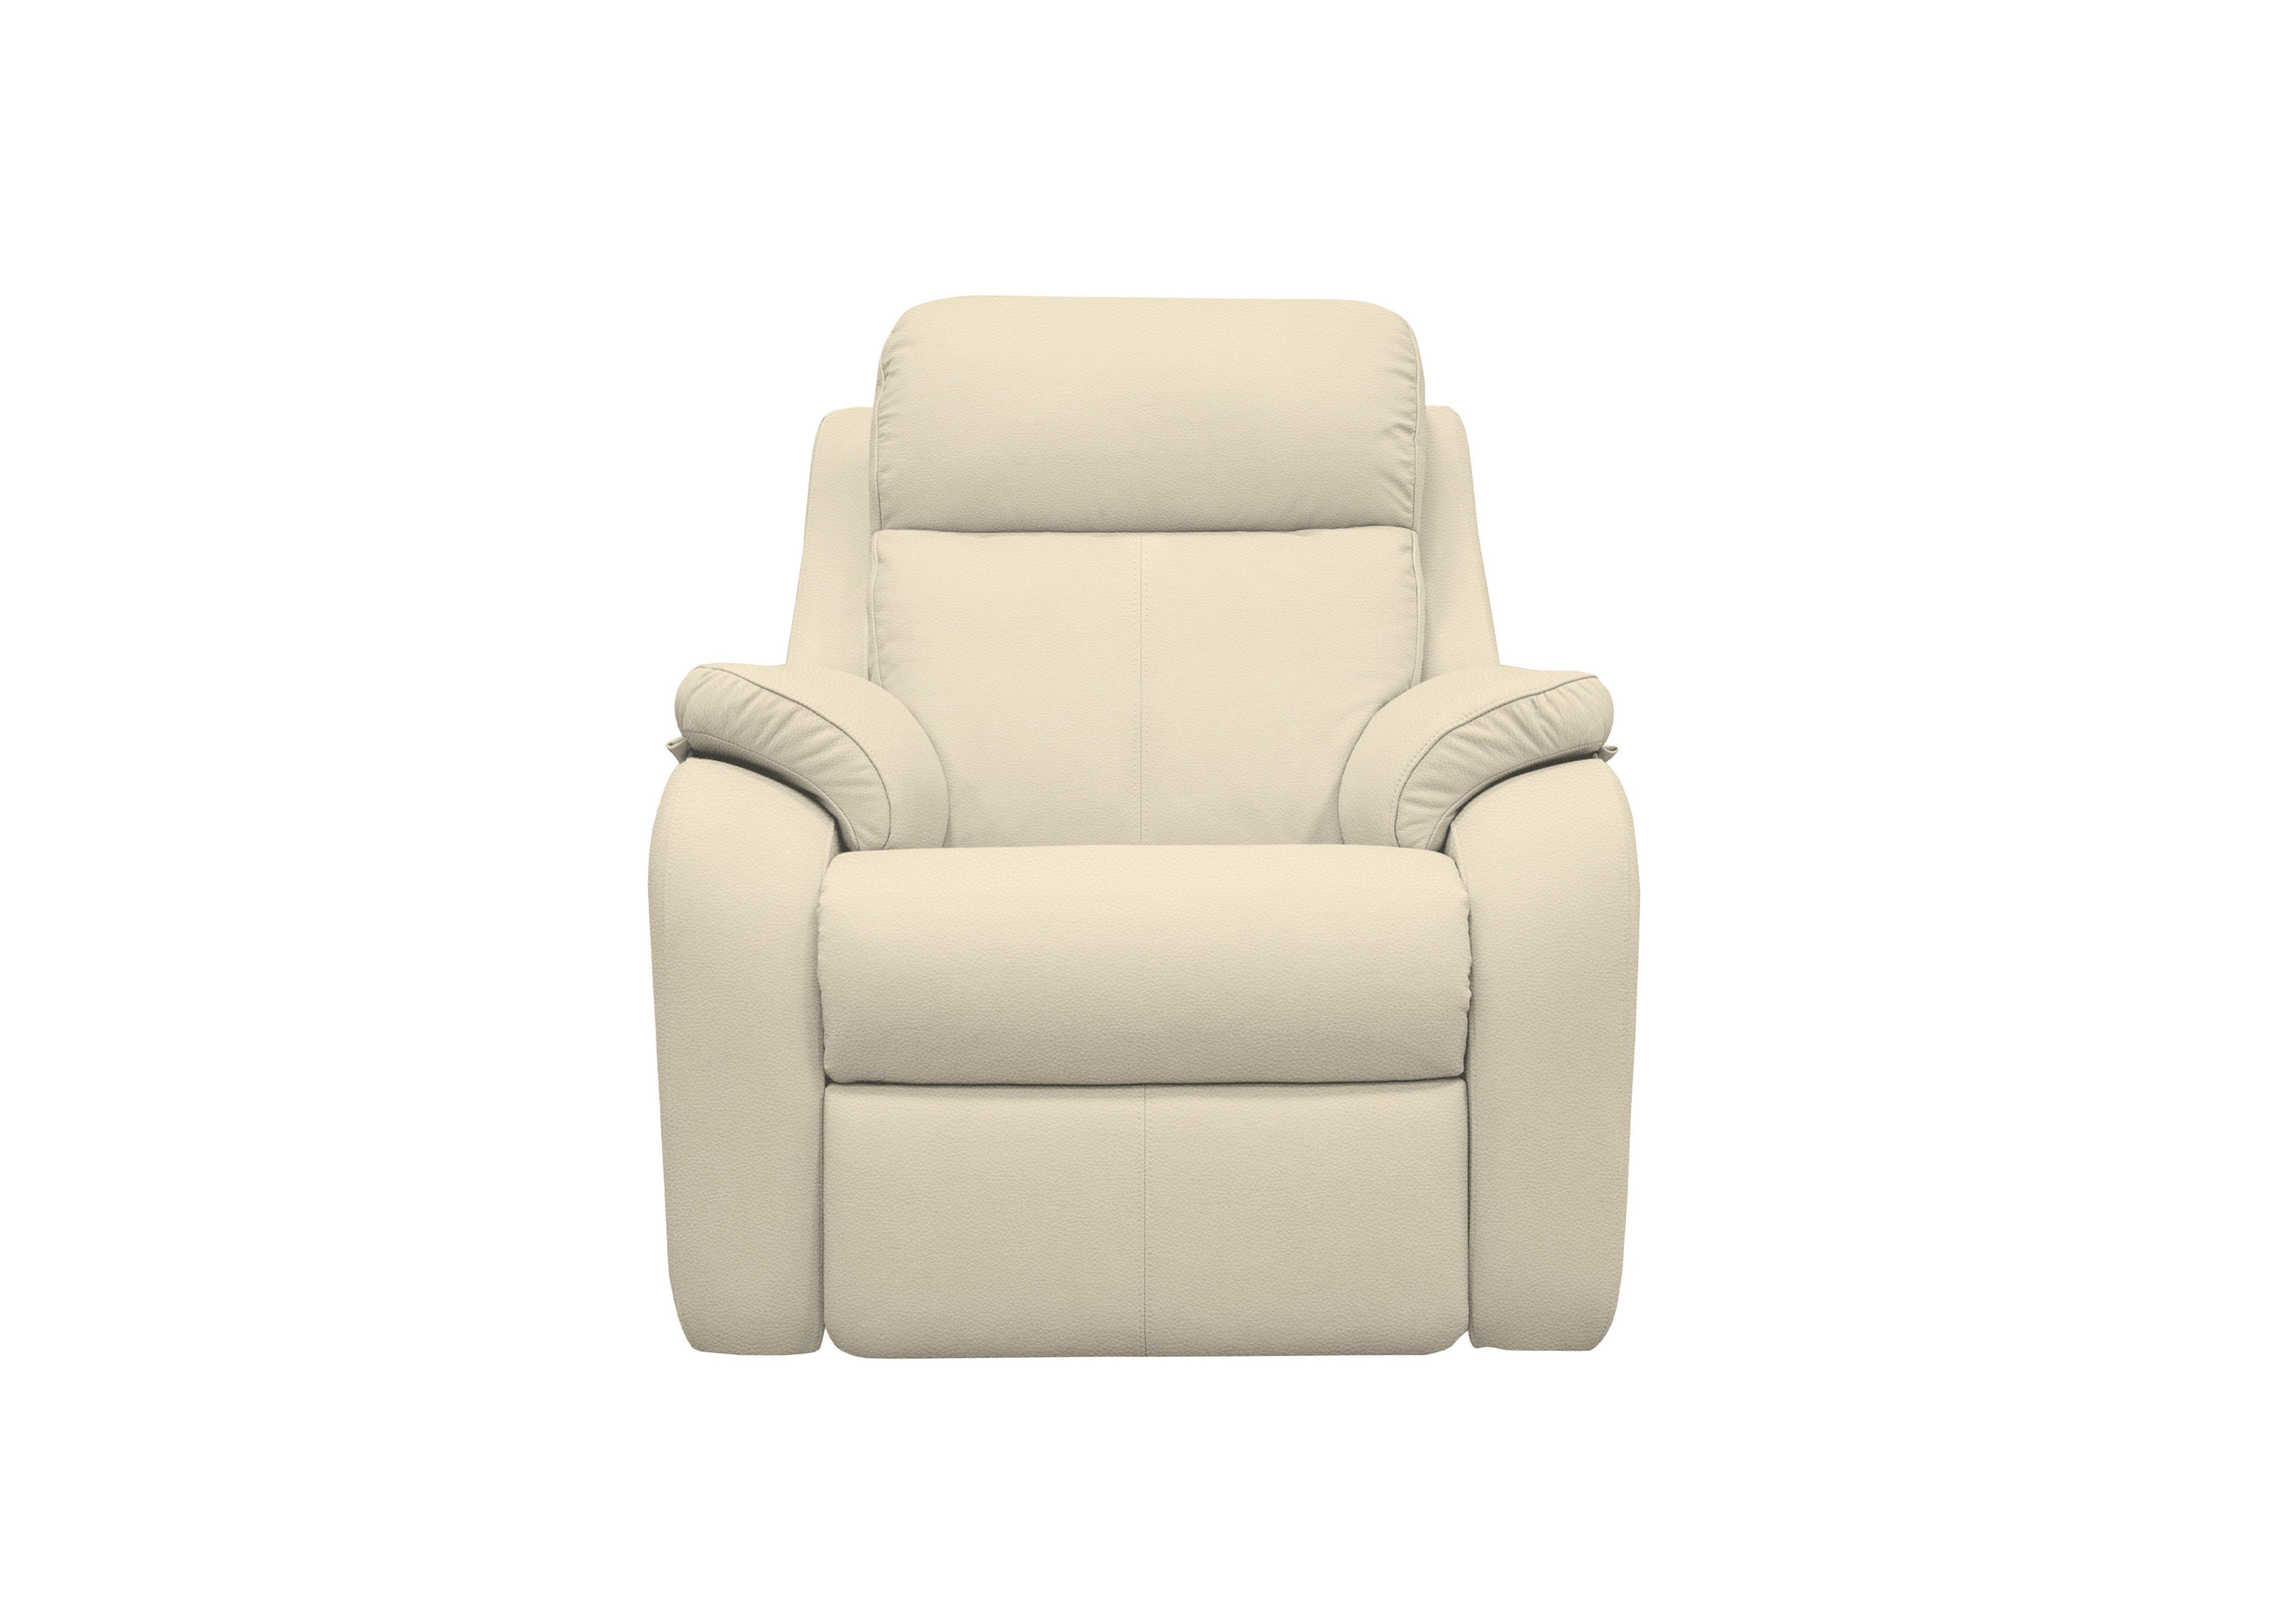 Kingsbury Leather Power Recliner Armchair with Power Headrests in L843 Cambridge Stone on Furniture Village